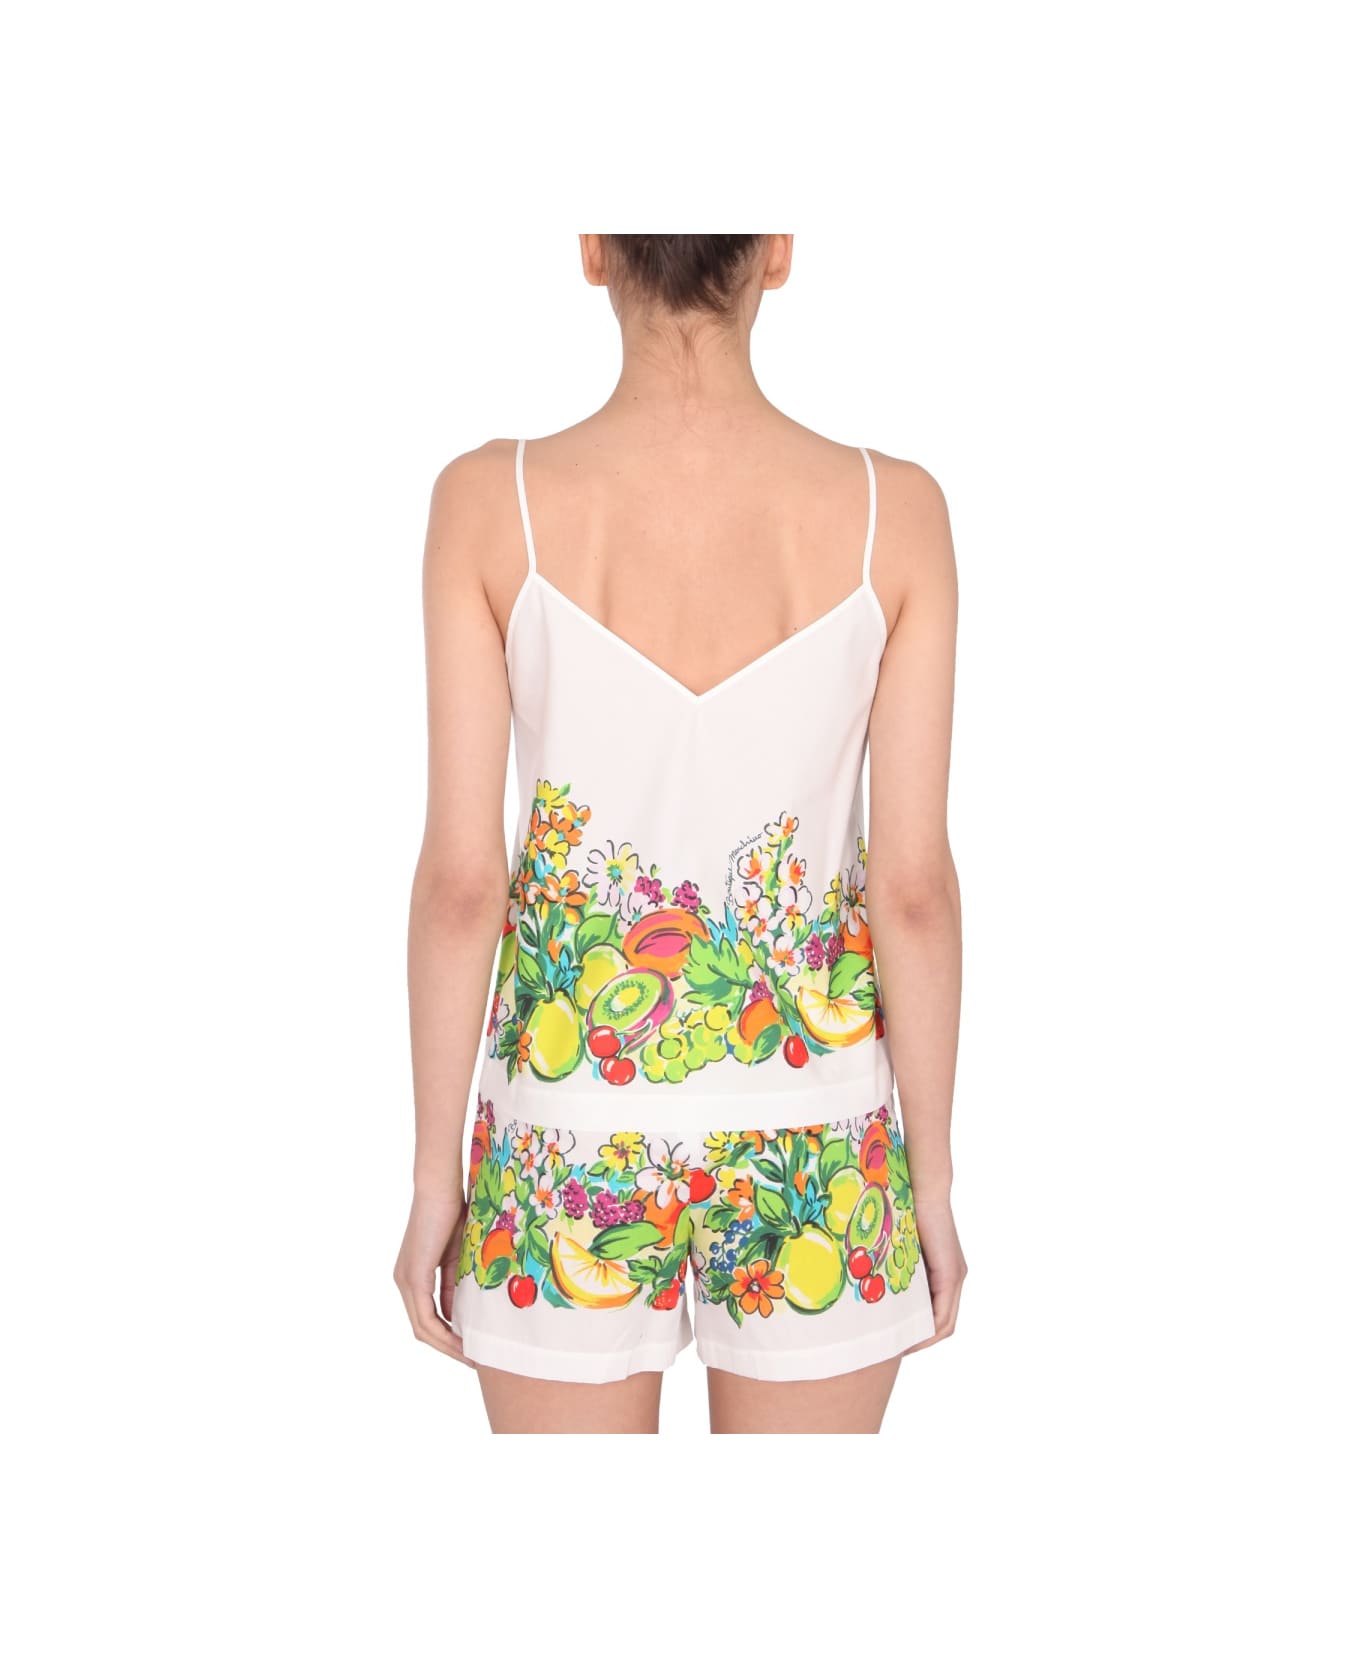 Boutique Moschino Flower And Fruit Print Top - MULTICOLOUR